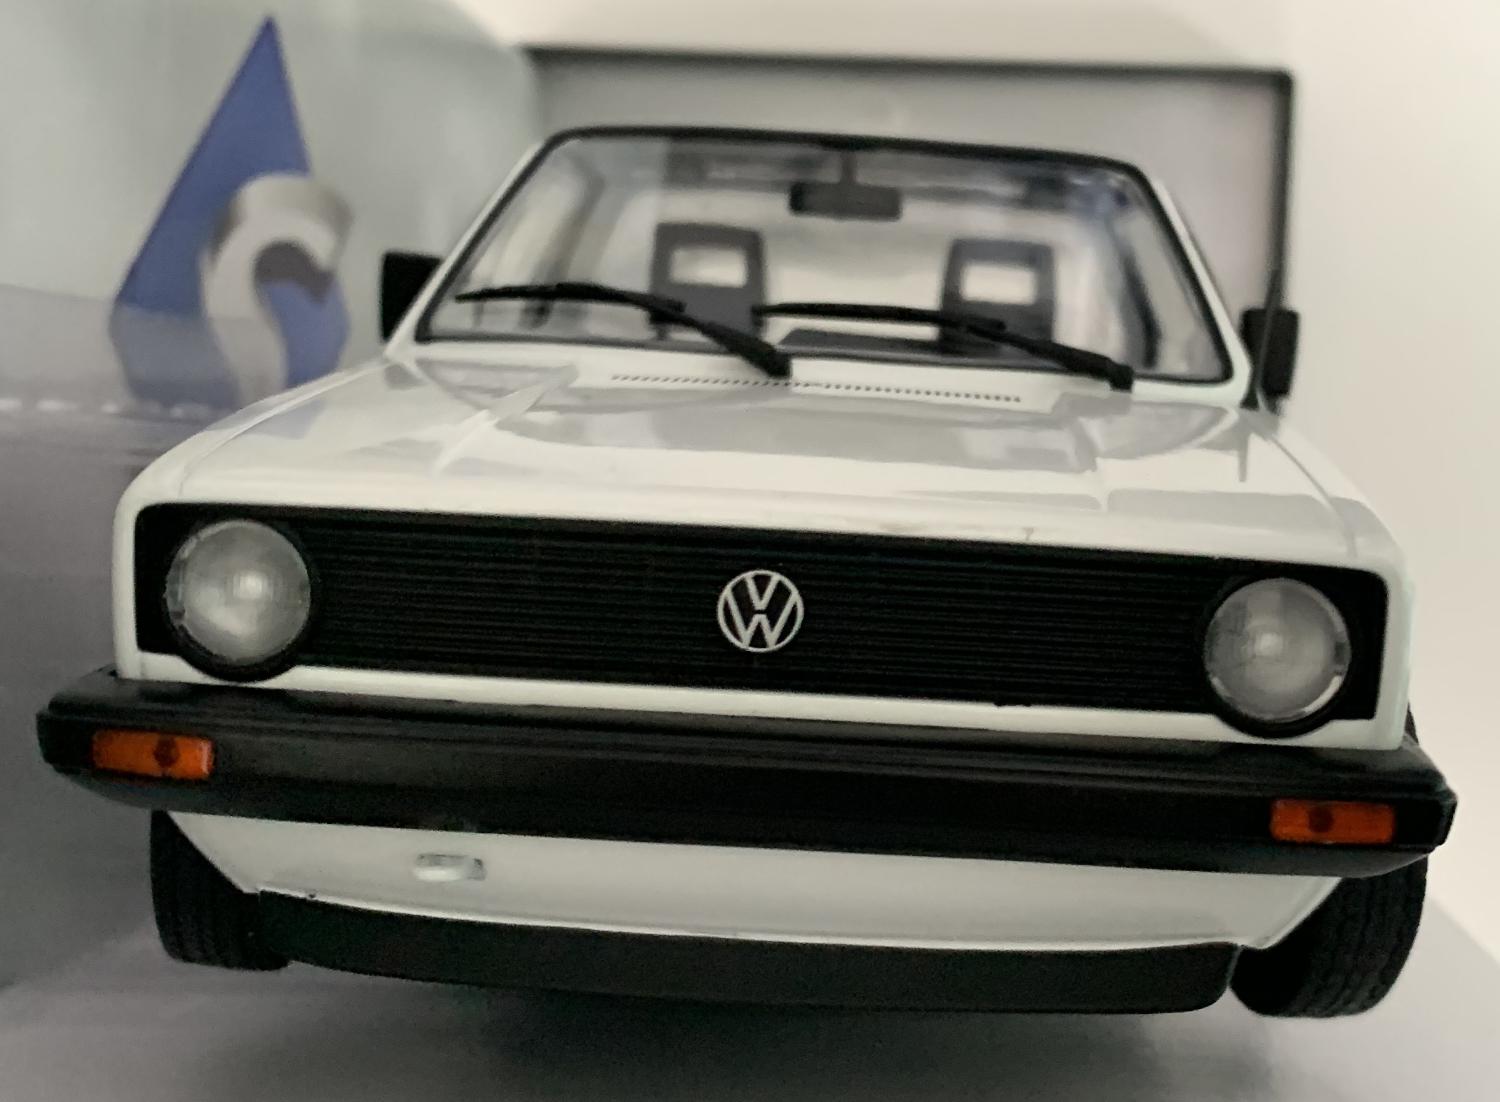 An excellent scale model of the VW Caddy with high level of detail throughout